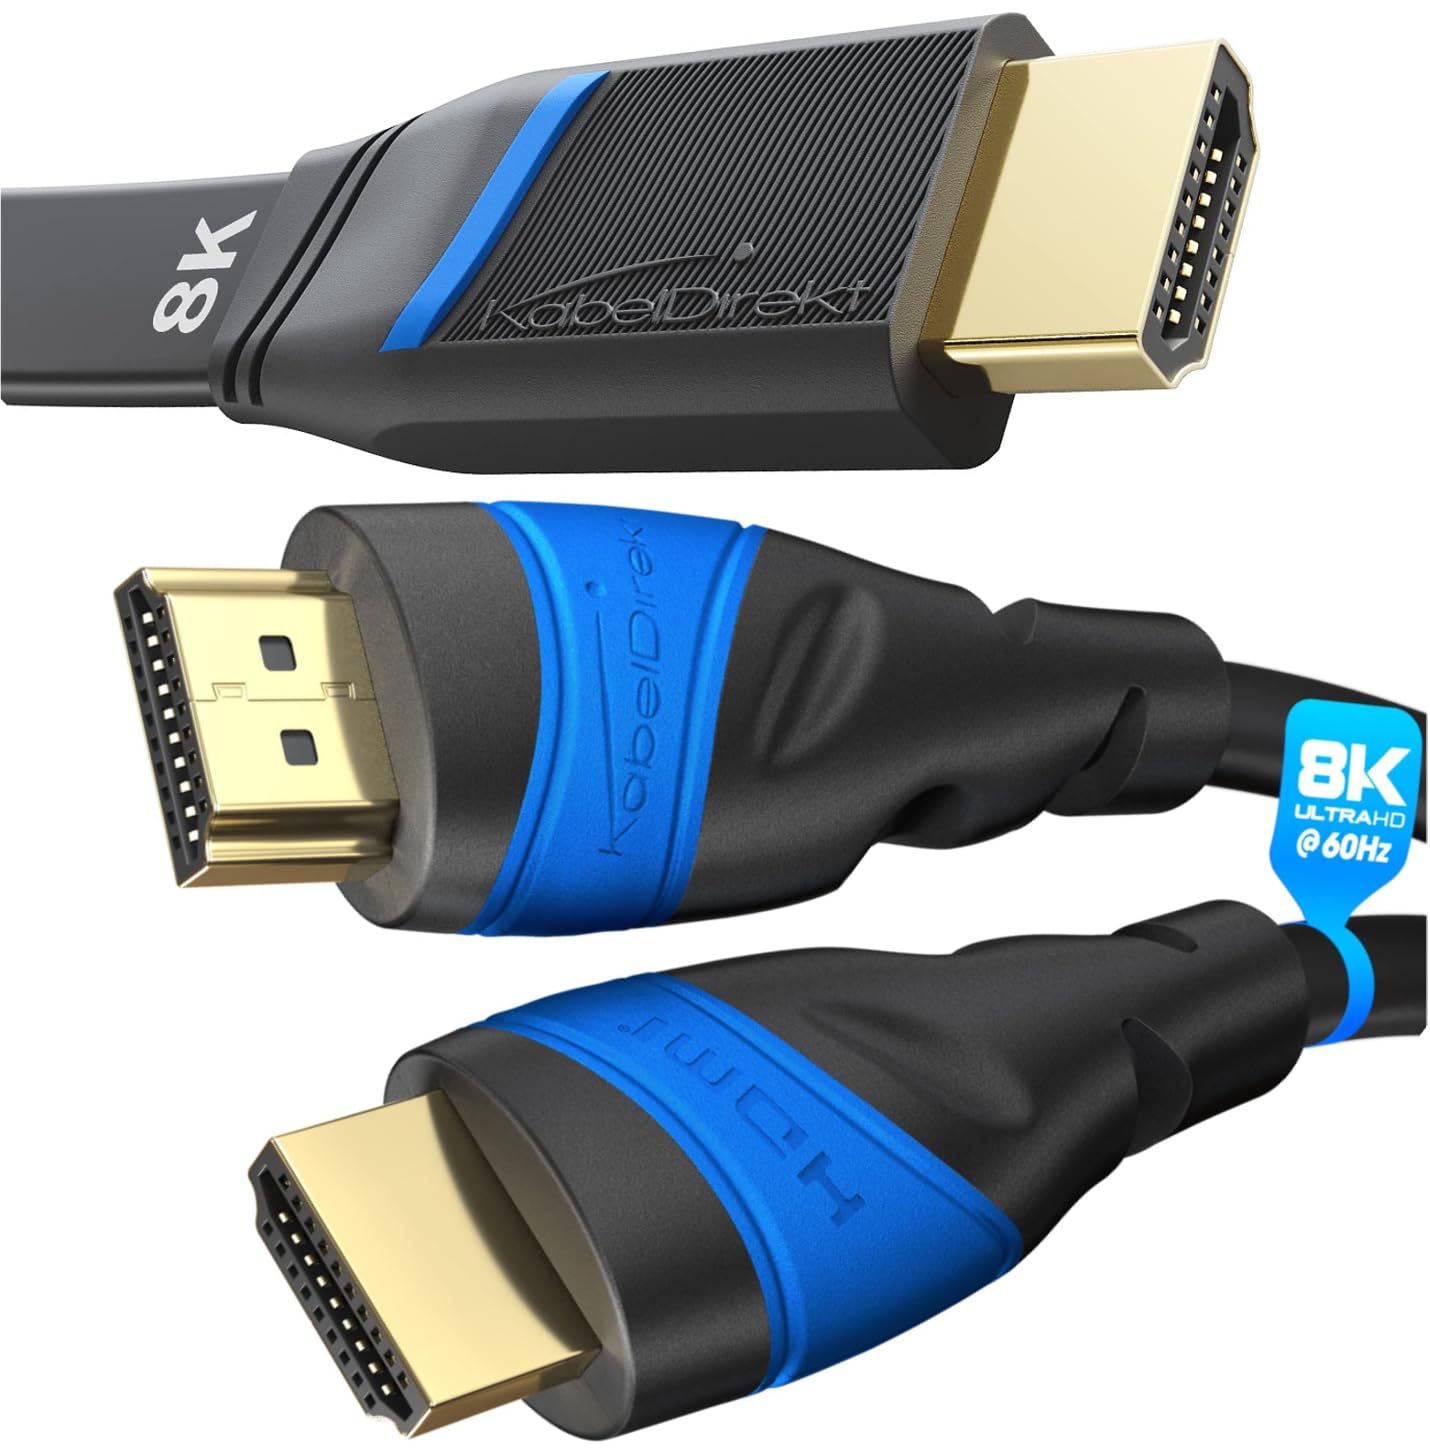 KabelDirekt 6ft 4K/8K HDMI Cable + 6.6ft HDMI Flat Cable for Laying - High Speed HDMI 2.0 Cables Bundle